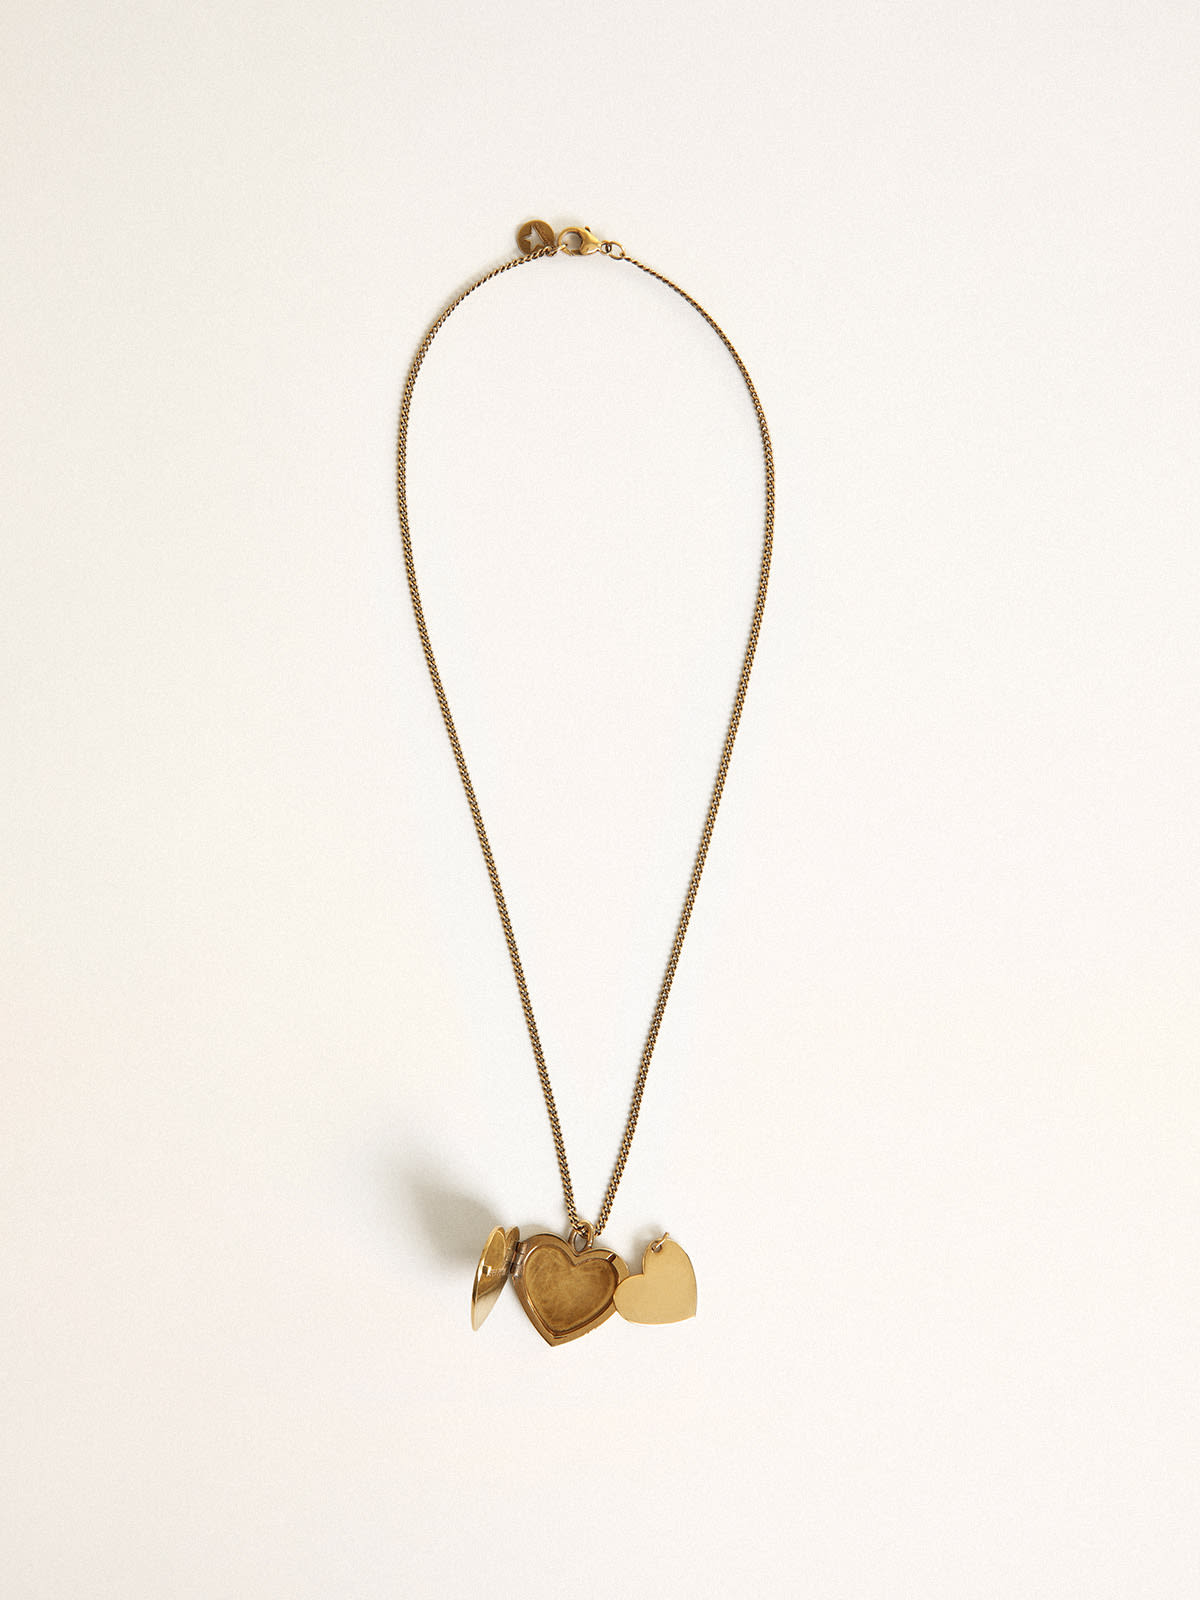 Necklace in antique gold color with heart charms